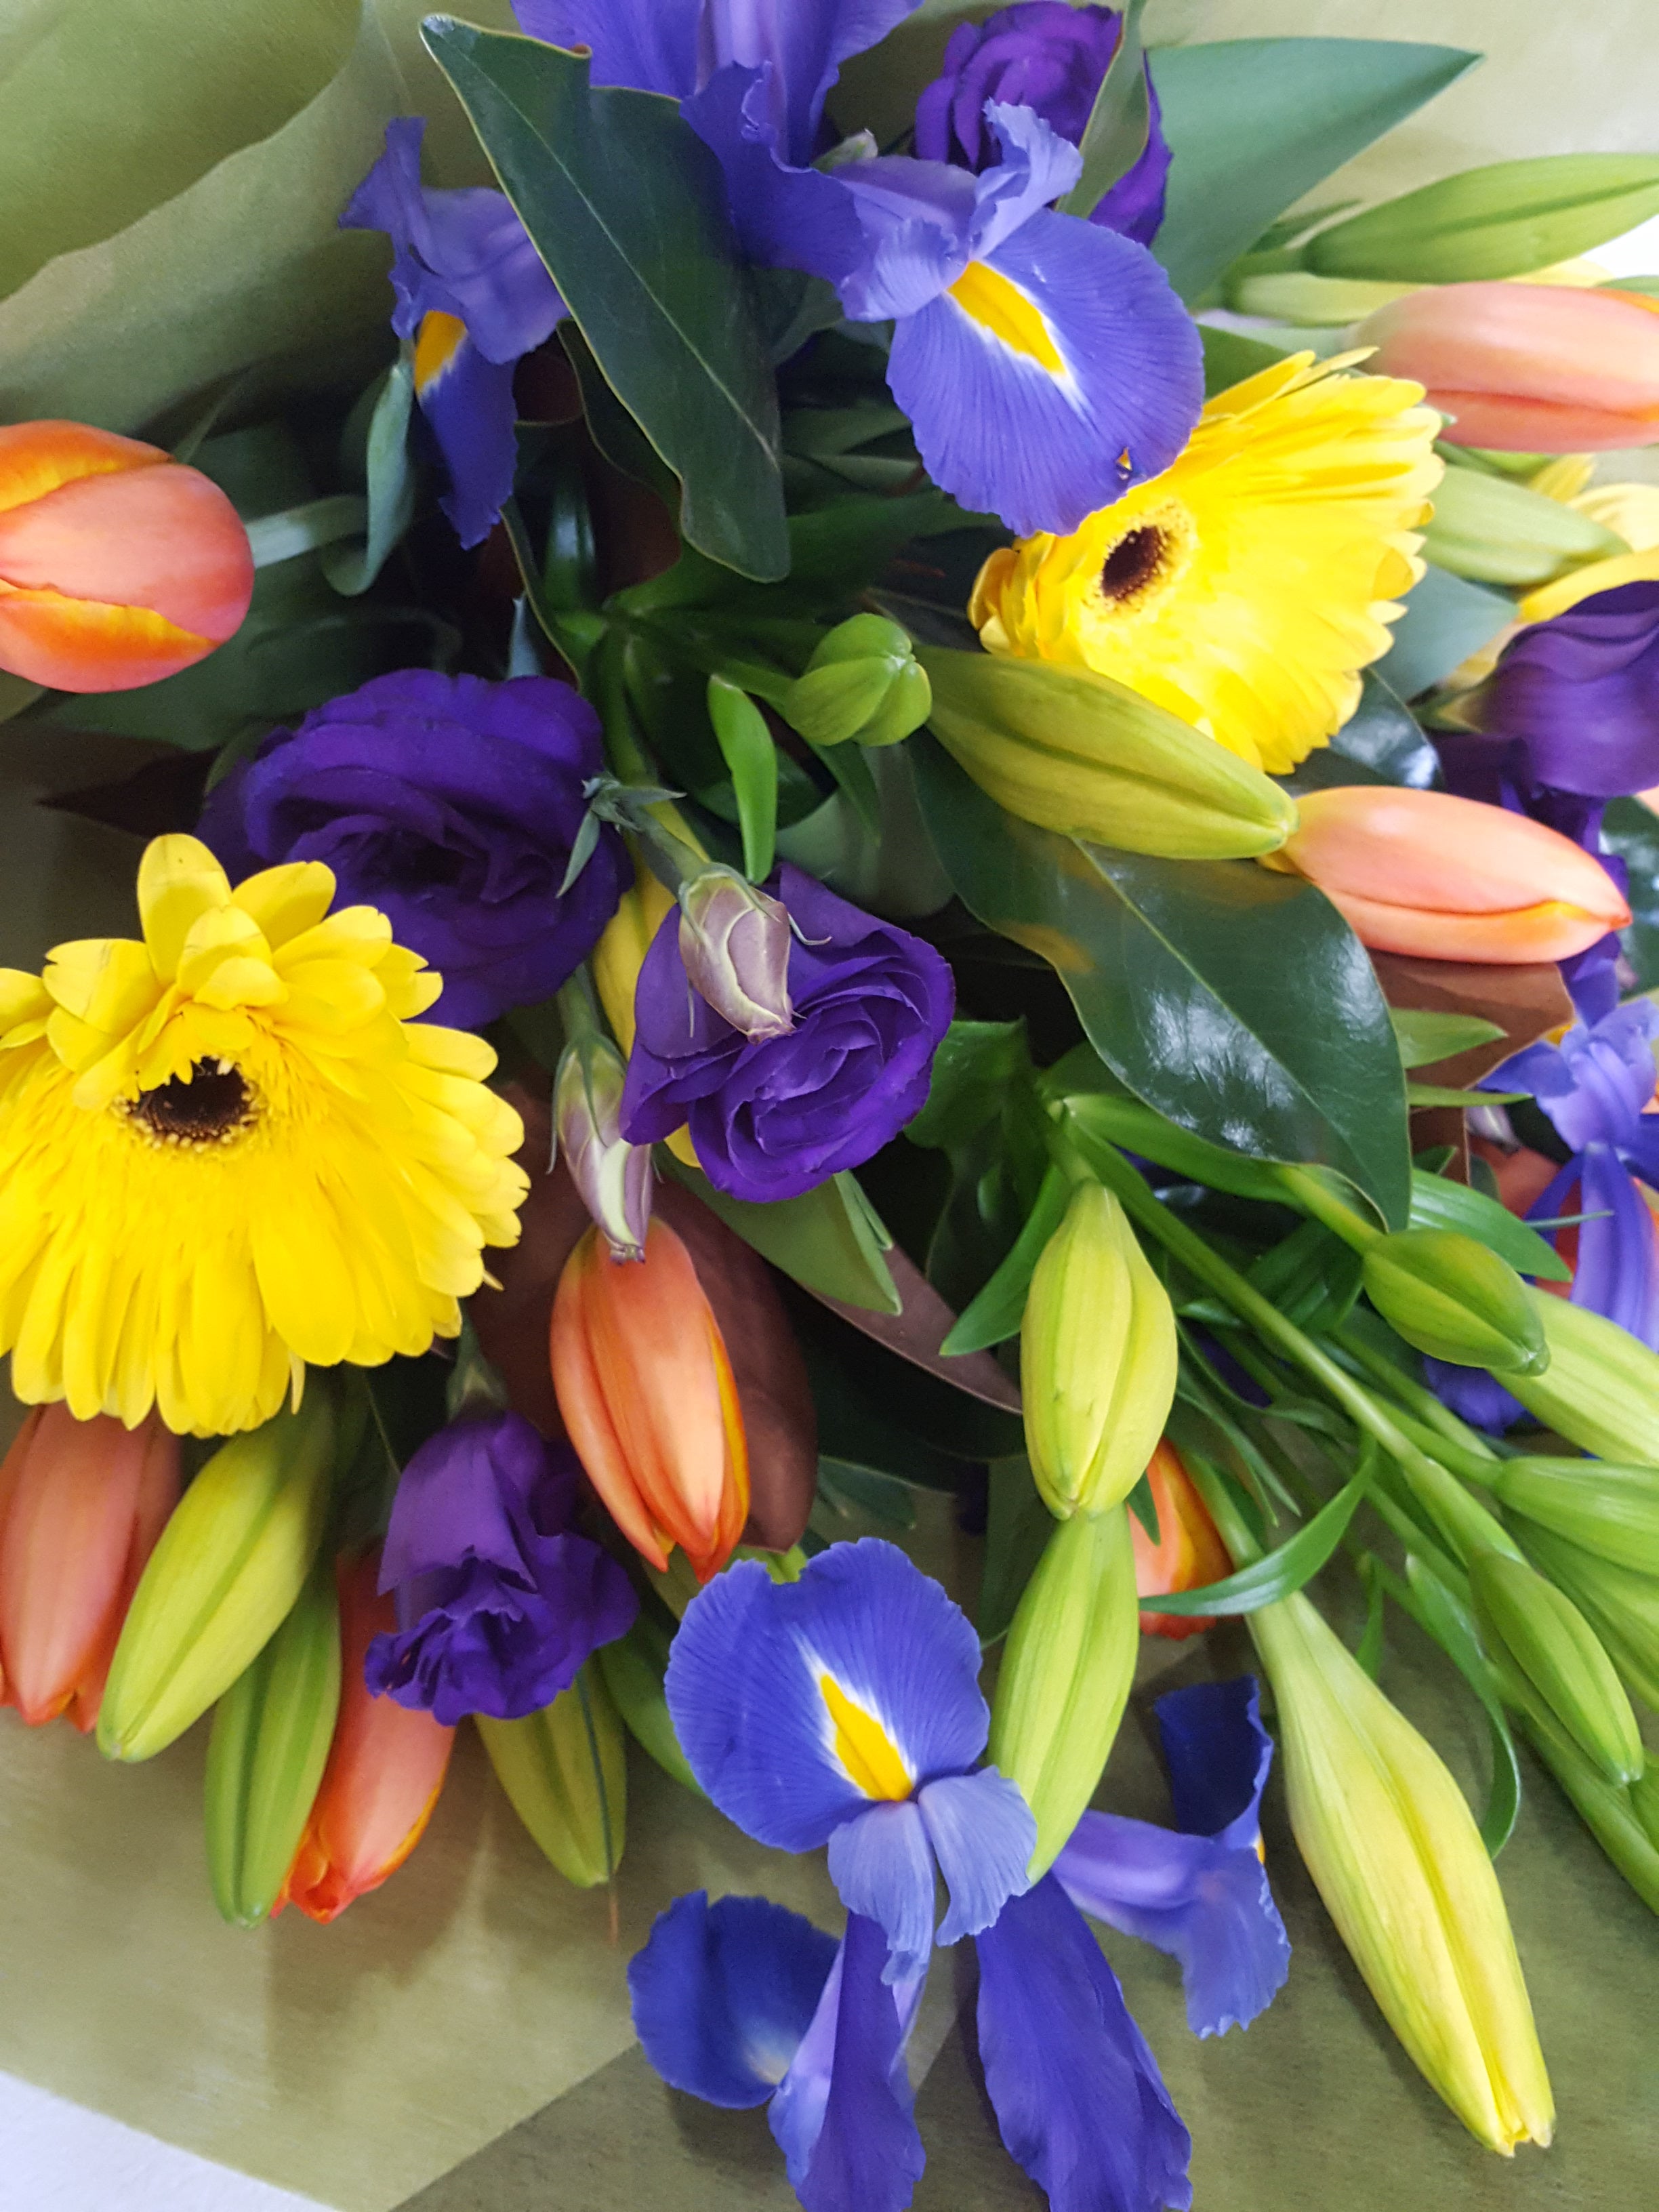 Bouquets & arrangements created using a selection of brightly coloured seasonal flowers such as iris,lilies,tulips,lisianthus & gerberas can be delivered in Bendigo